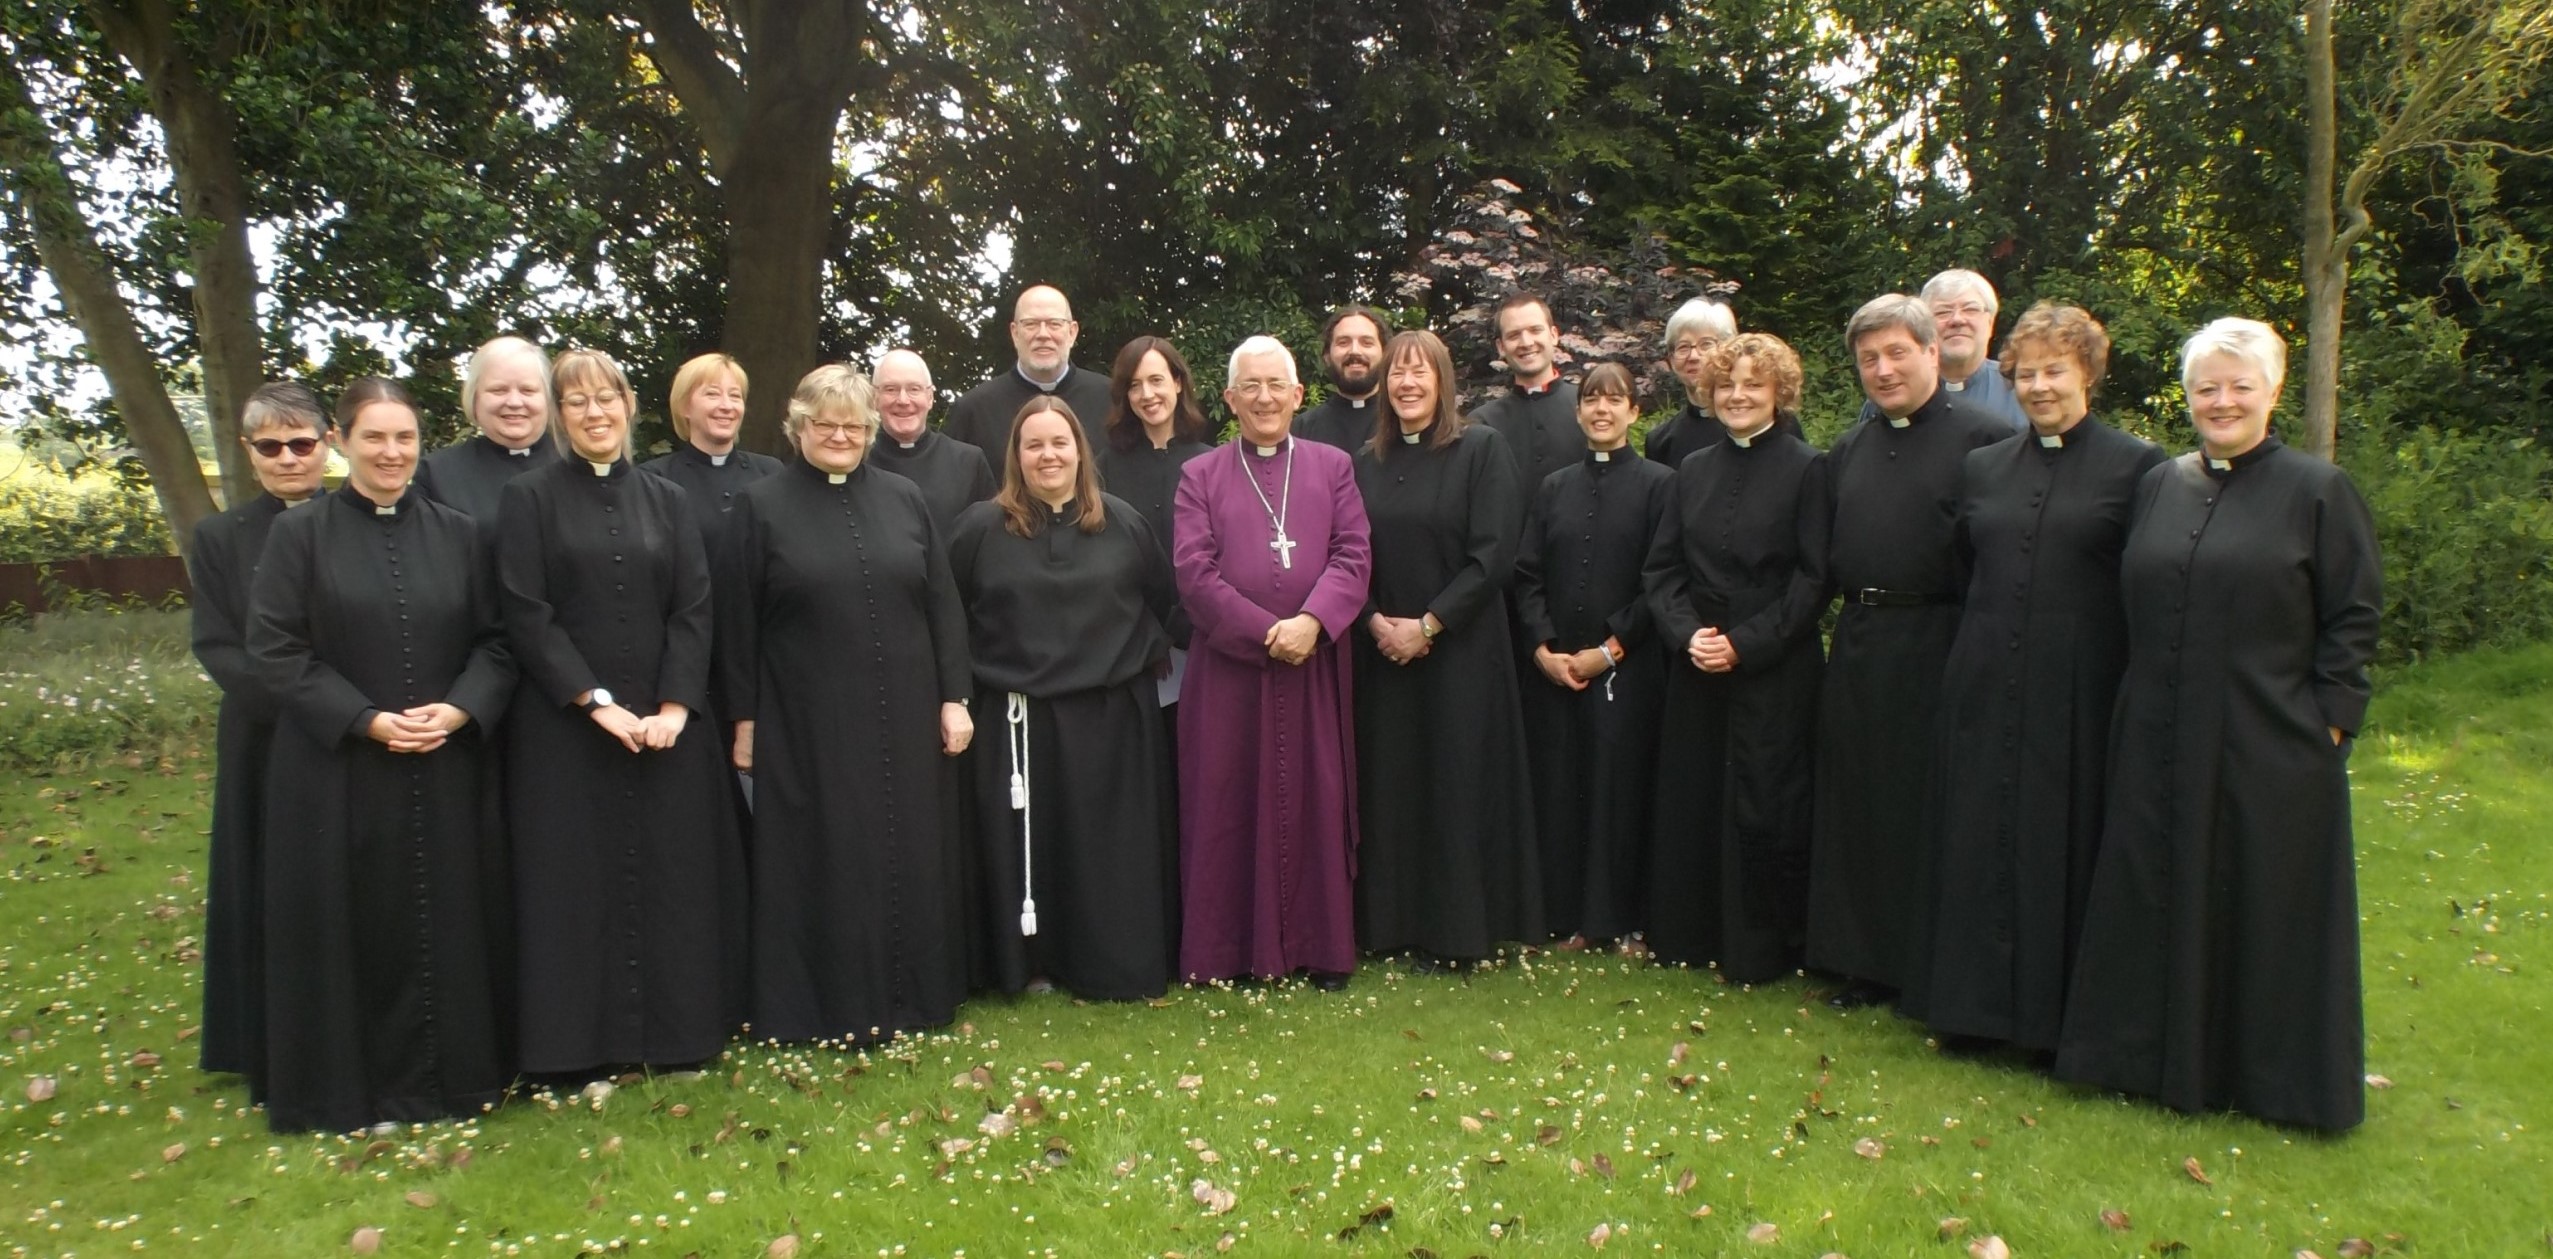 Bishop Michael 'charged' the deacons at Shallowford House ahead of their priestly ordinations